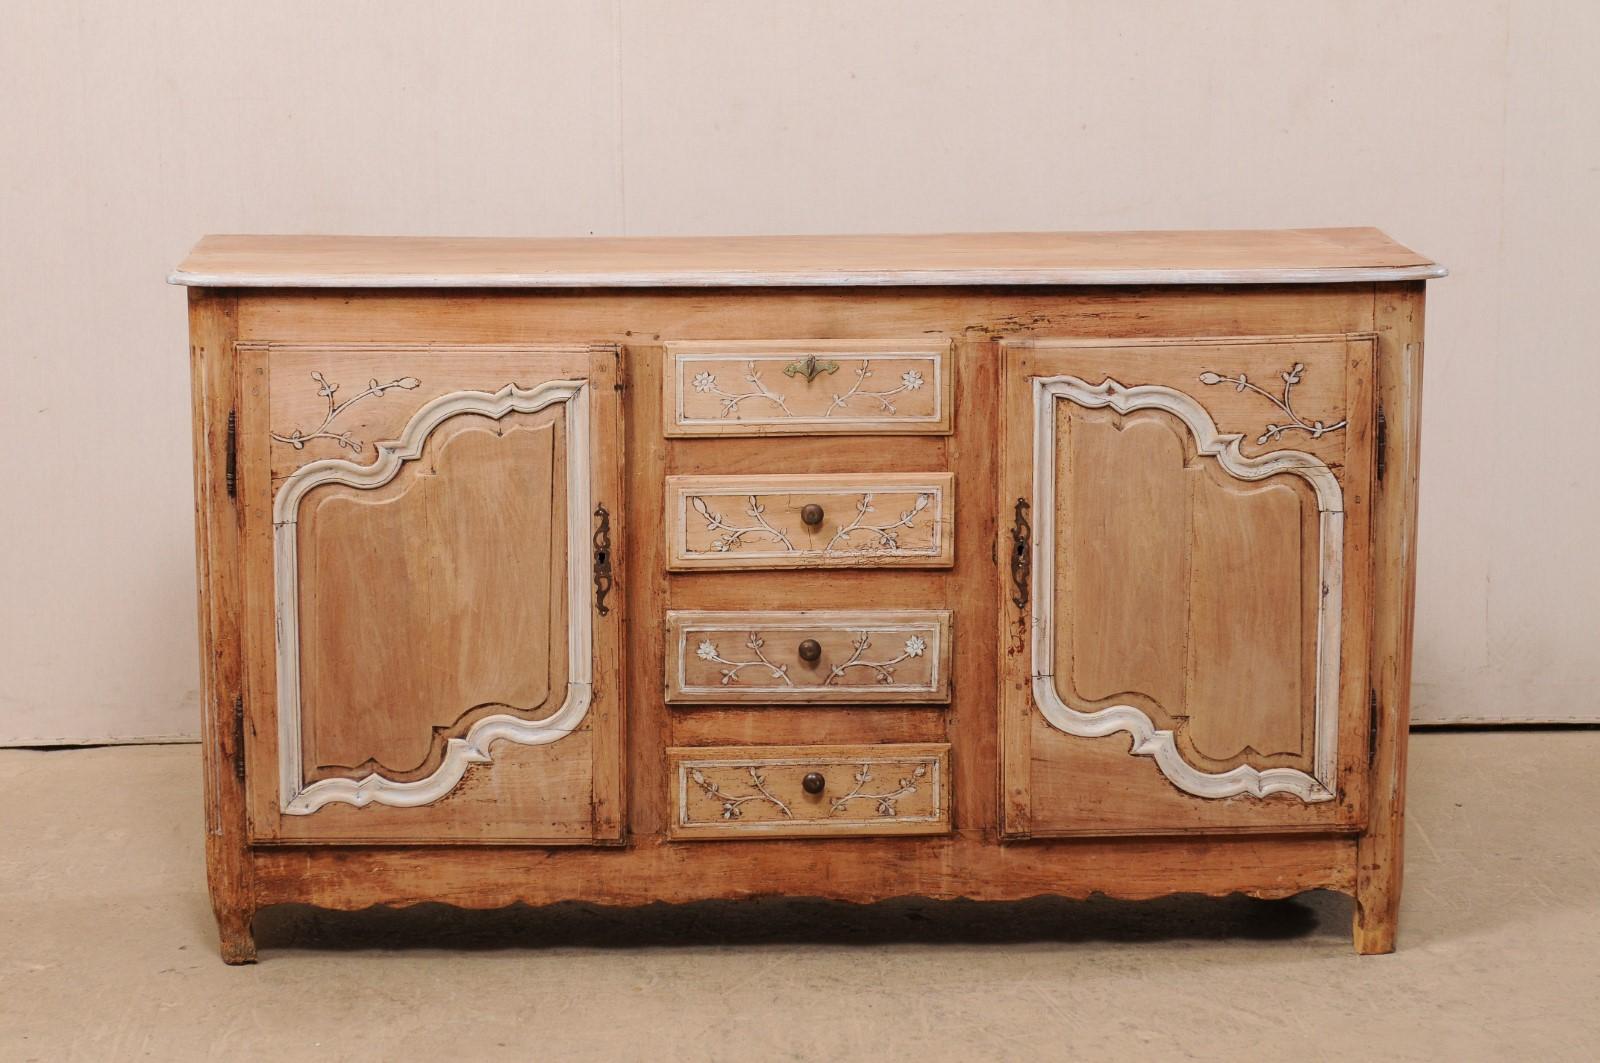 A French carved and bleached wood sideboard cabinet from the early 19th century. This antique console from France features a slightly overhanging and rounded edge top, which rests above a case which houses a pair of decoratively paneled doors